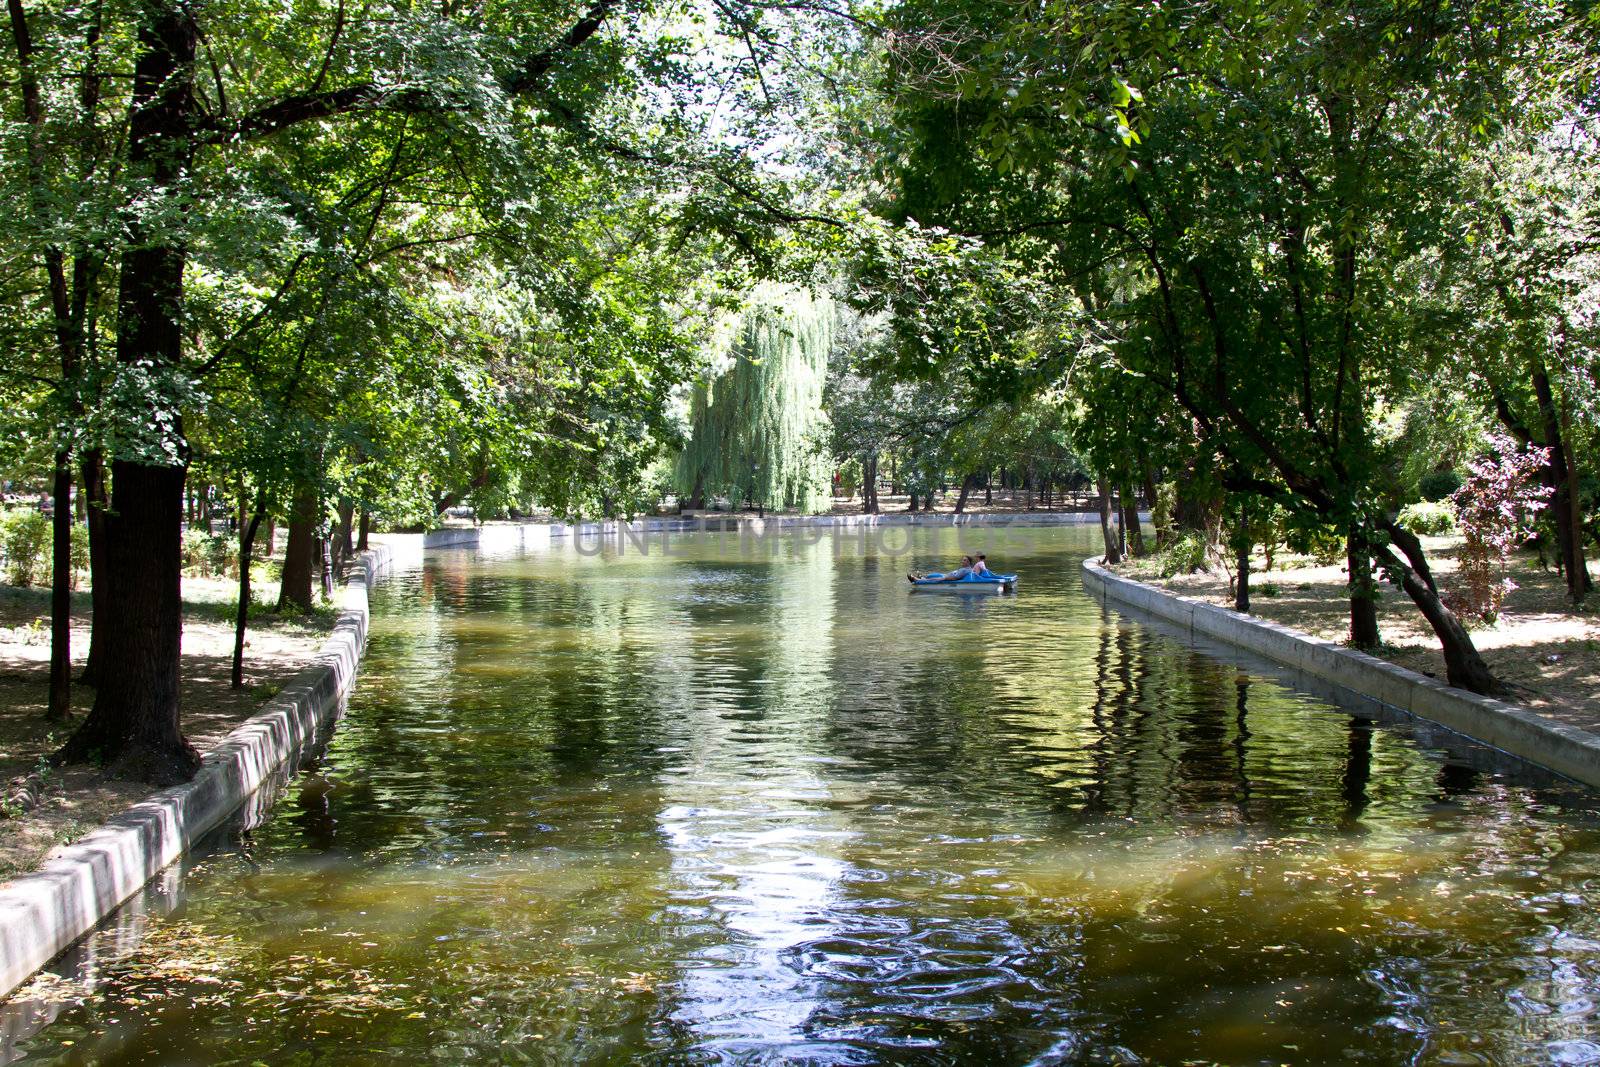 Park landscape in summer with green trees